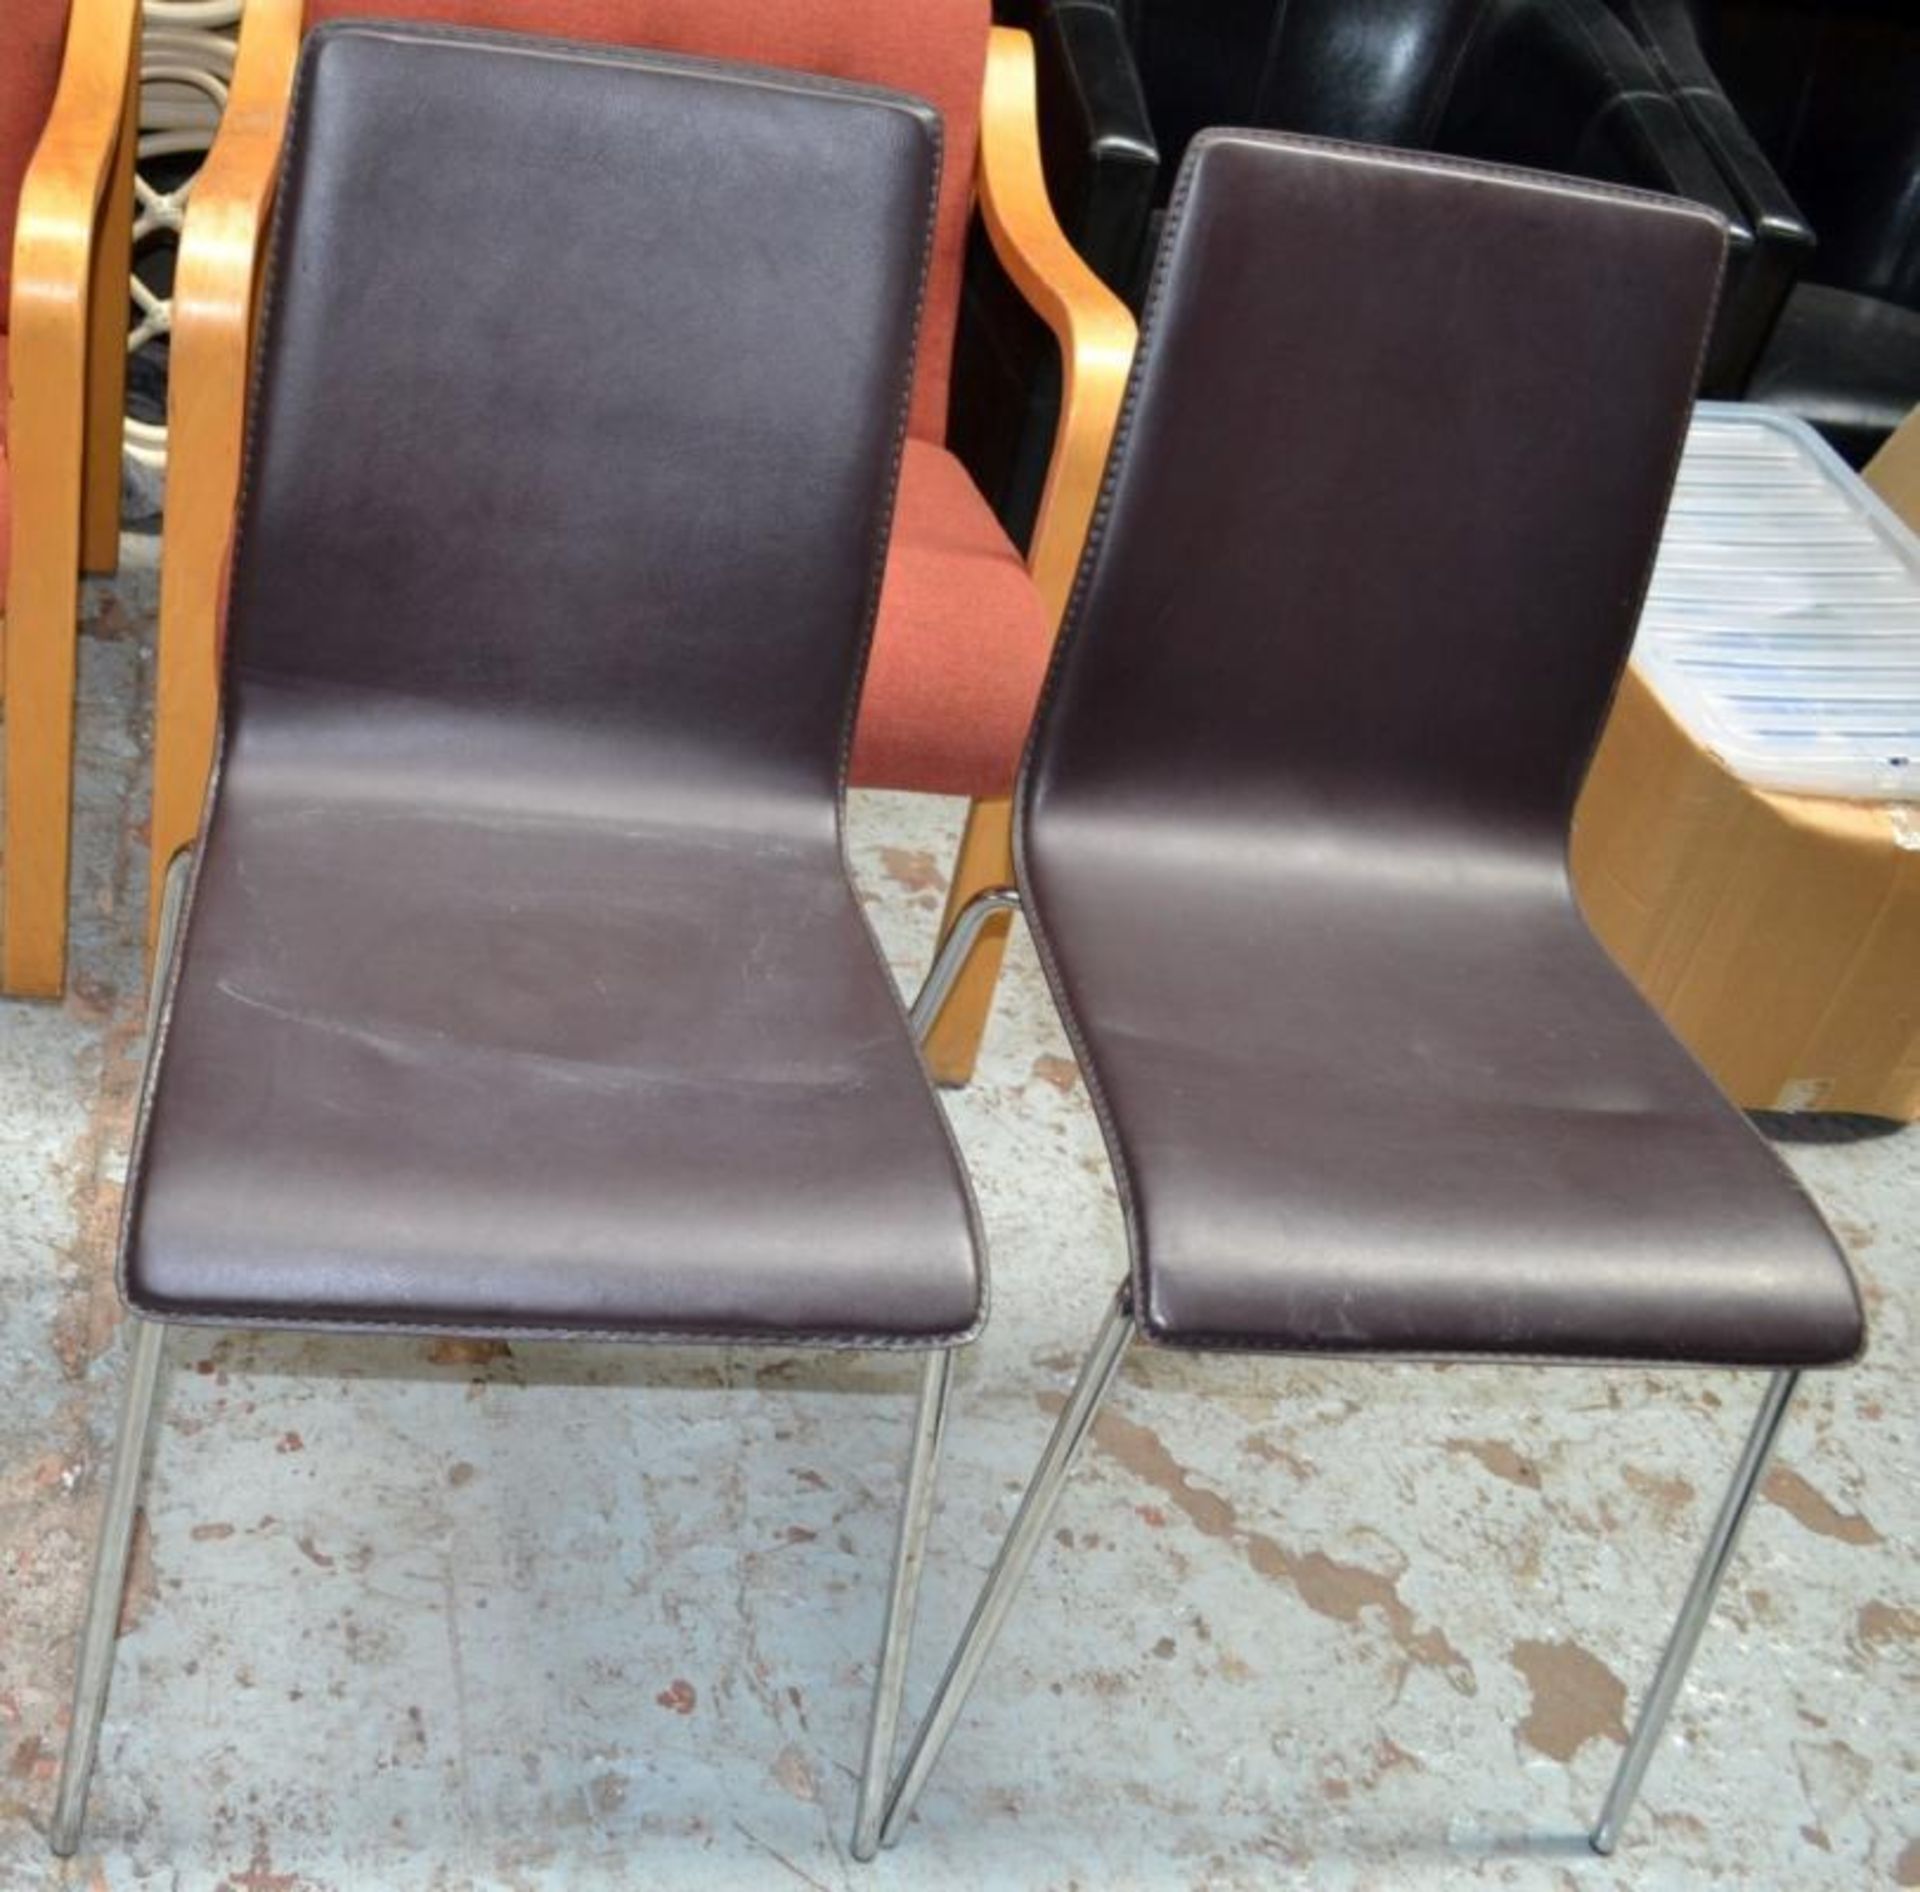 2 x Faux Leather Dining Chairs - Brown with Chrome Legs - H85 x W41 x D44cm - Ref: MWI018 - - Image 5 of 6